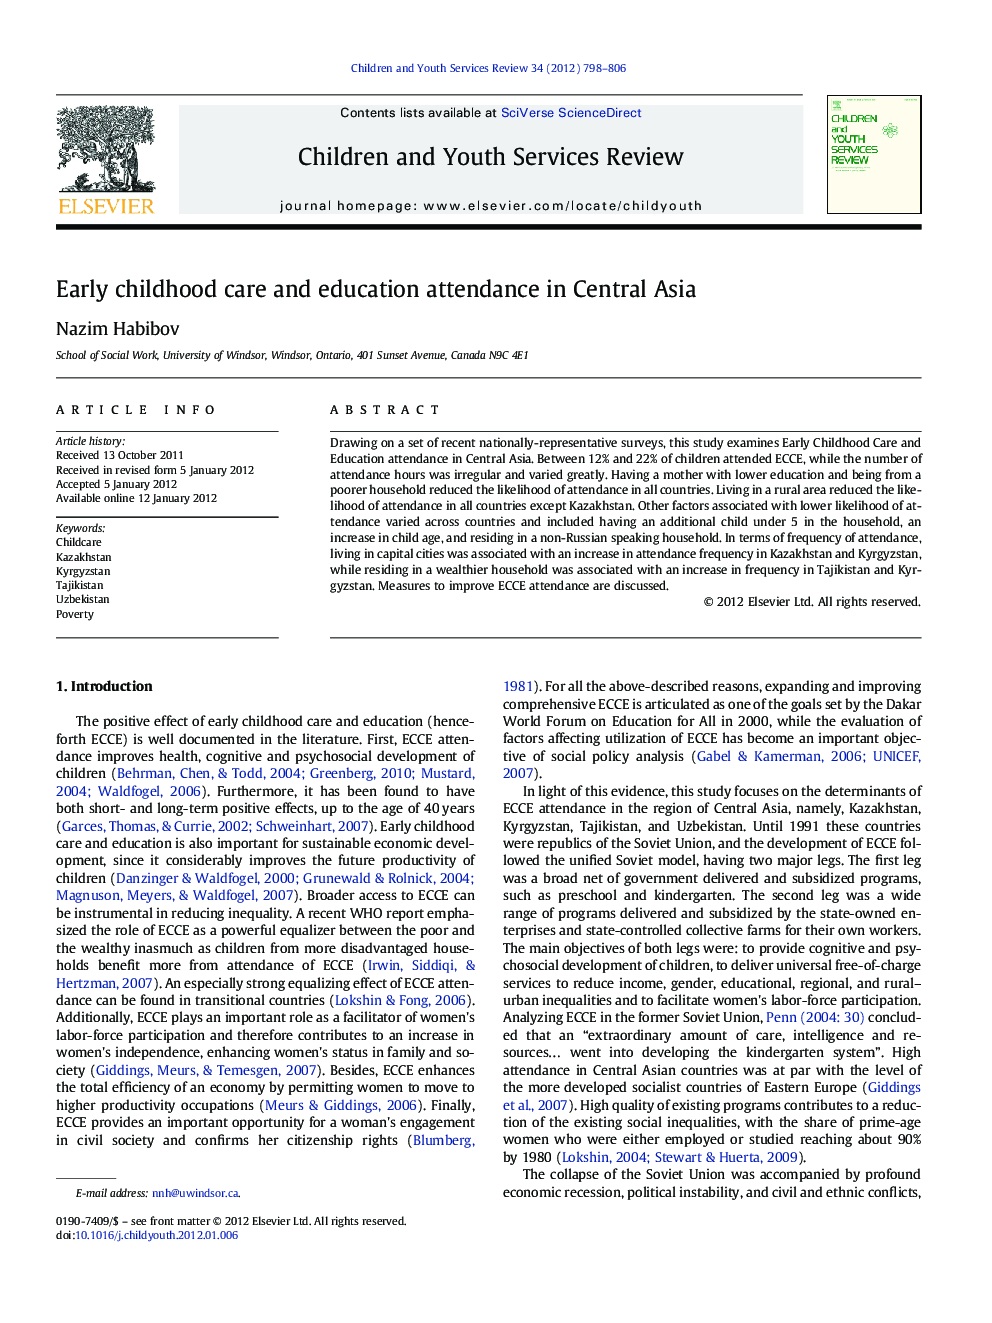 Early childhood care and education attendance in Central Asia